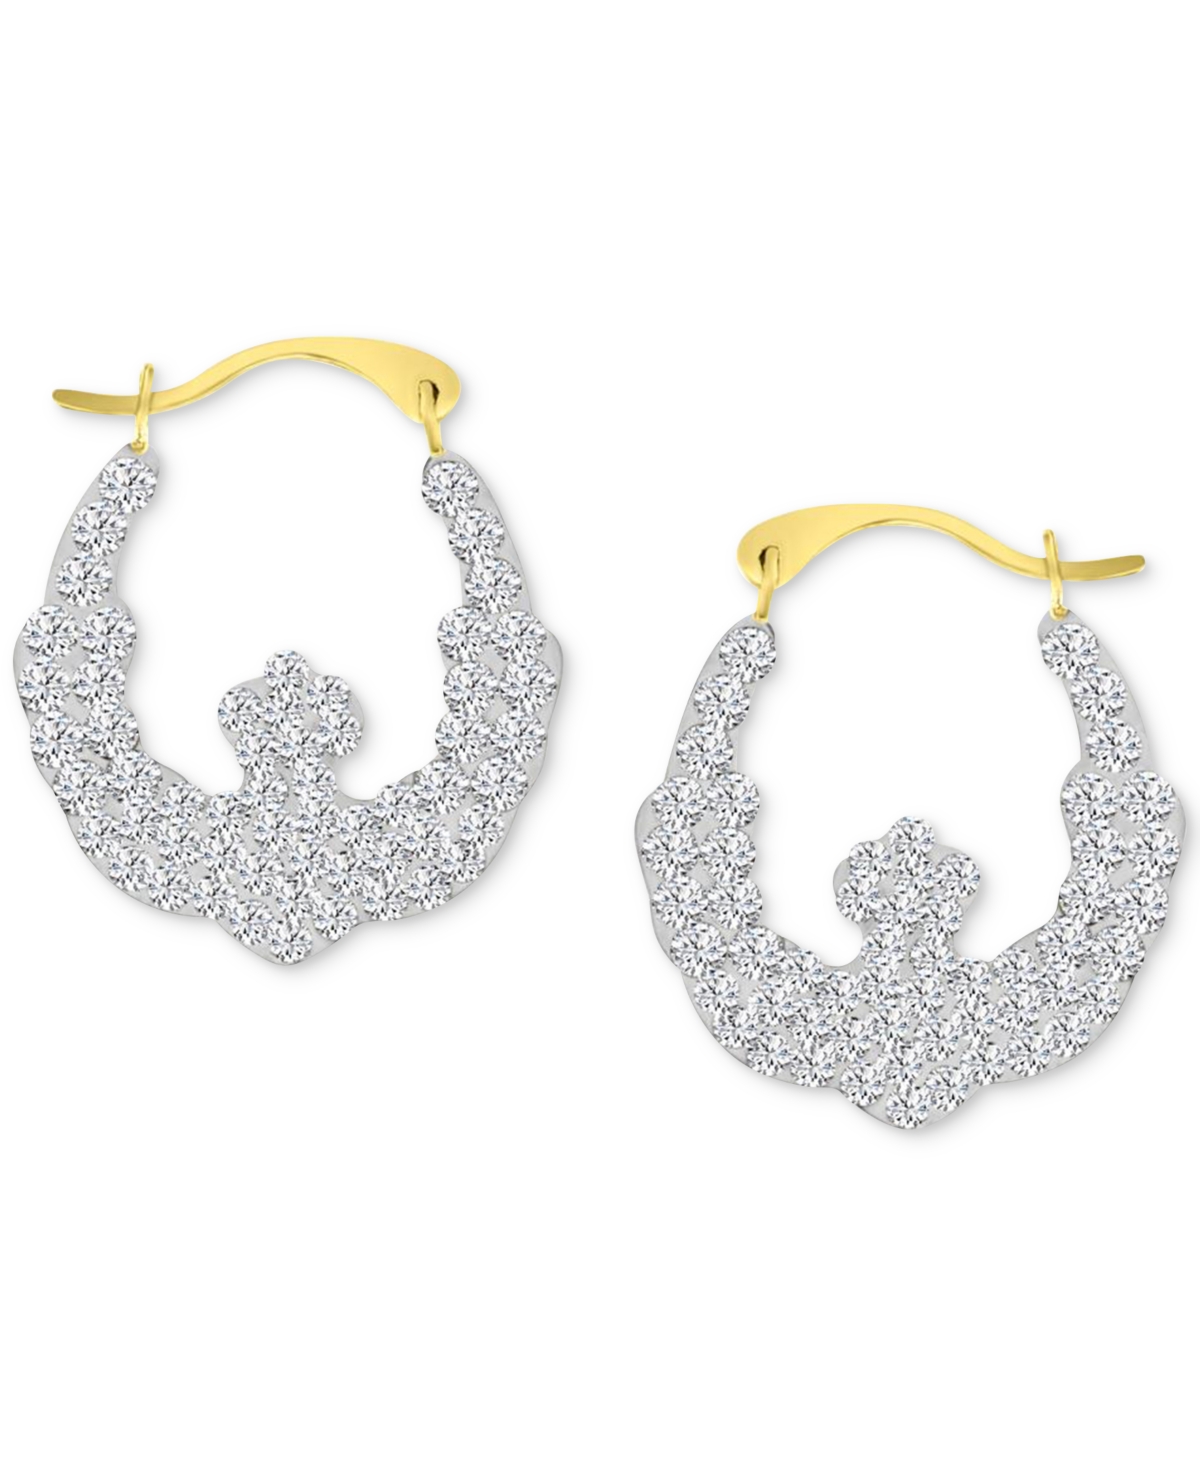 Crystal Pave Wavy Patterned Small Hoop Earrings in 10k Gold, 0.73" - Gold